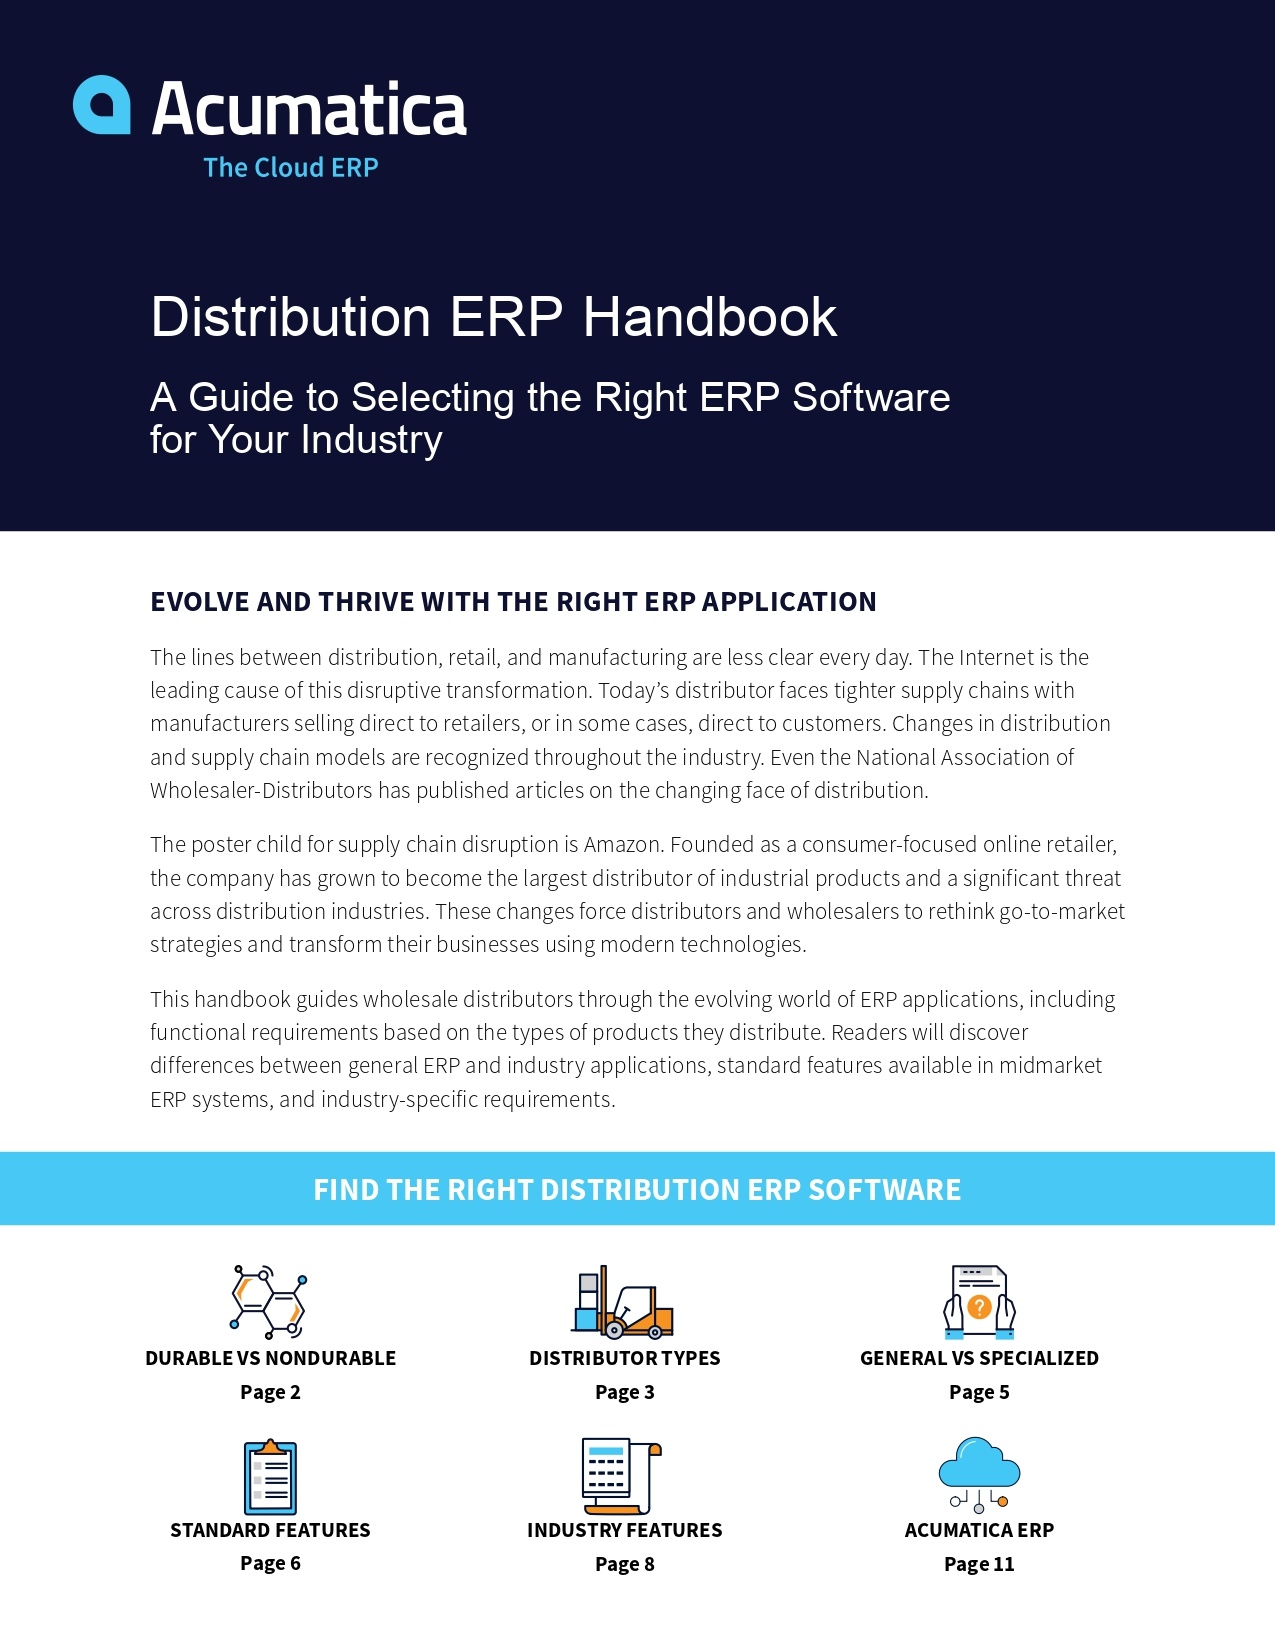 Distribution ERP Solutions: Find the Right Platform for Your Industry